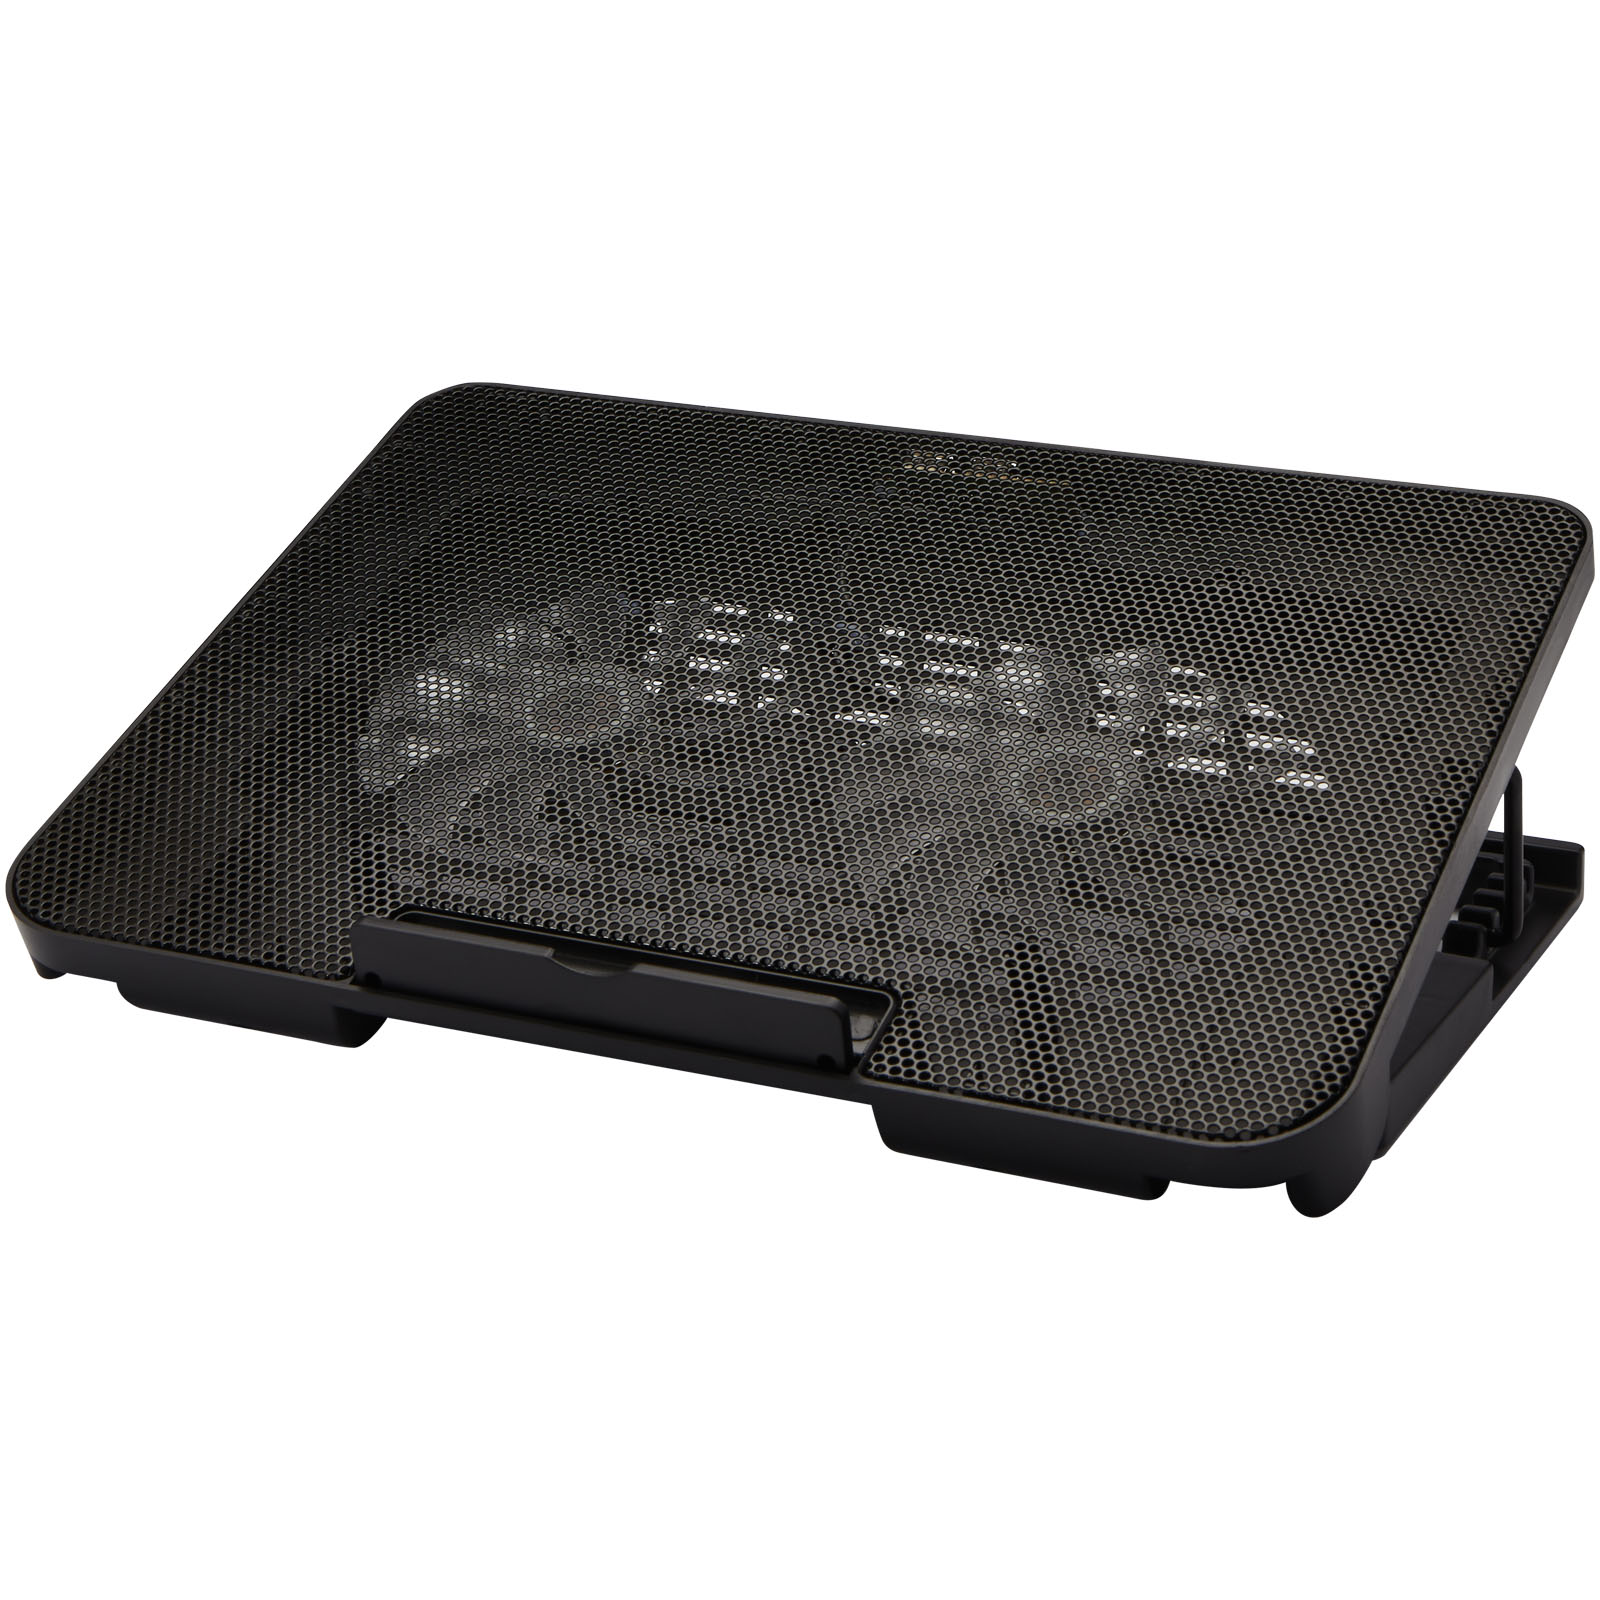 Advertising Computer Accessories - Gleam gaming laptop cooling stand - 0